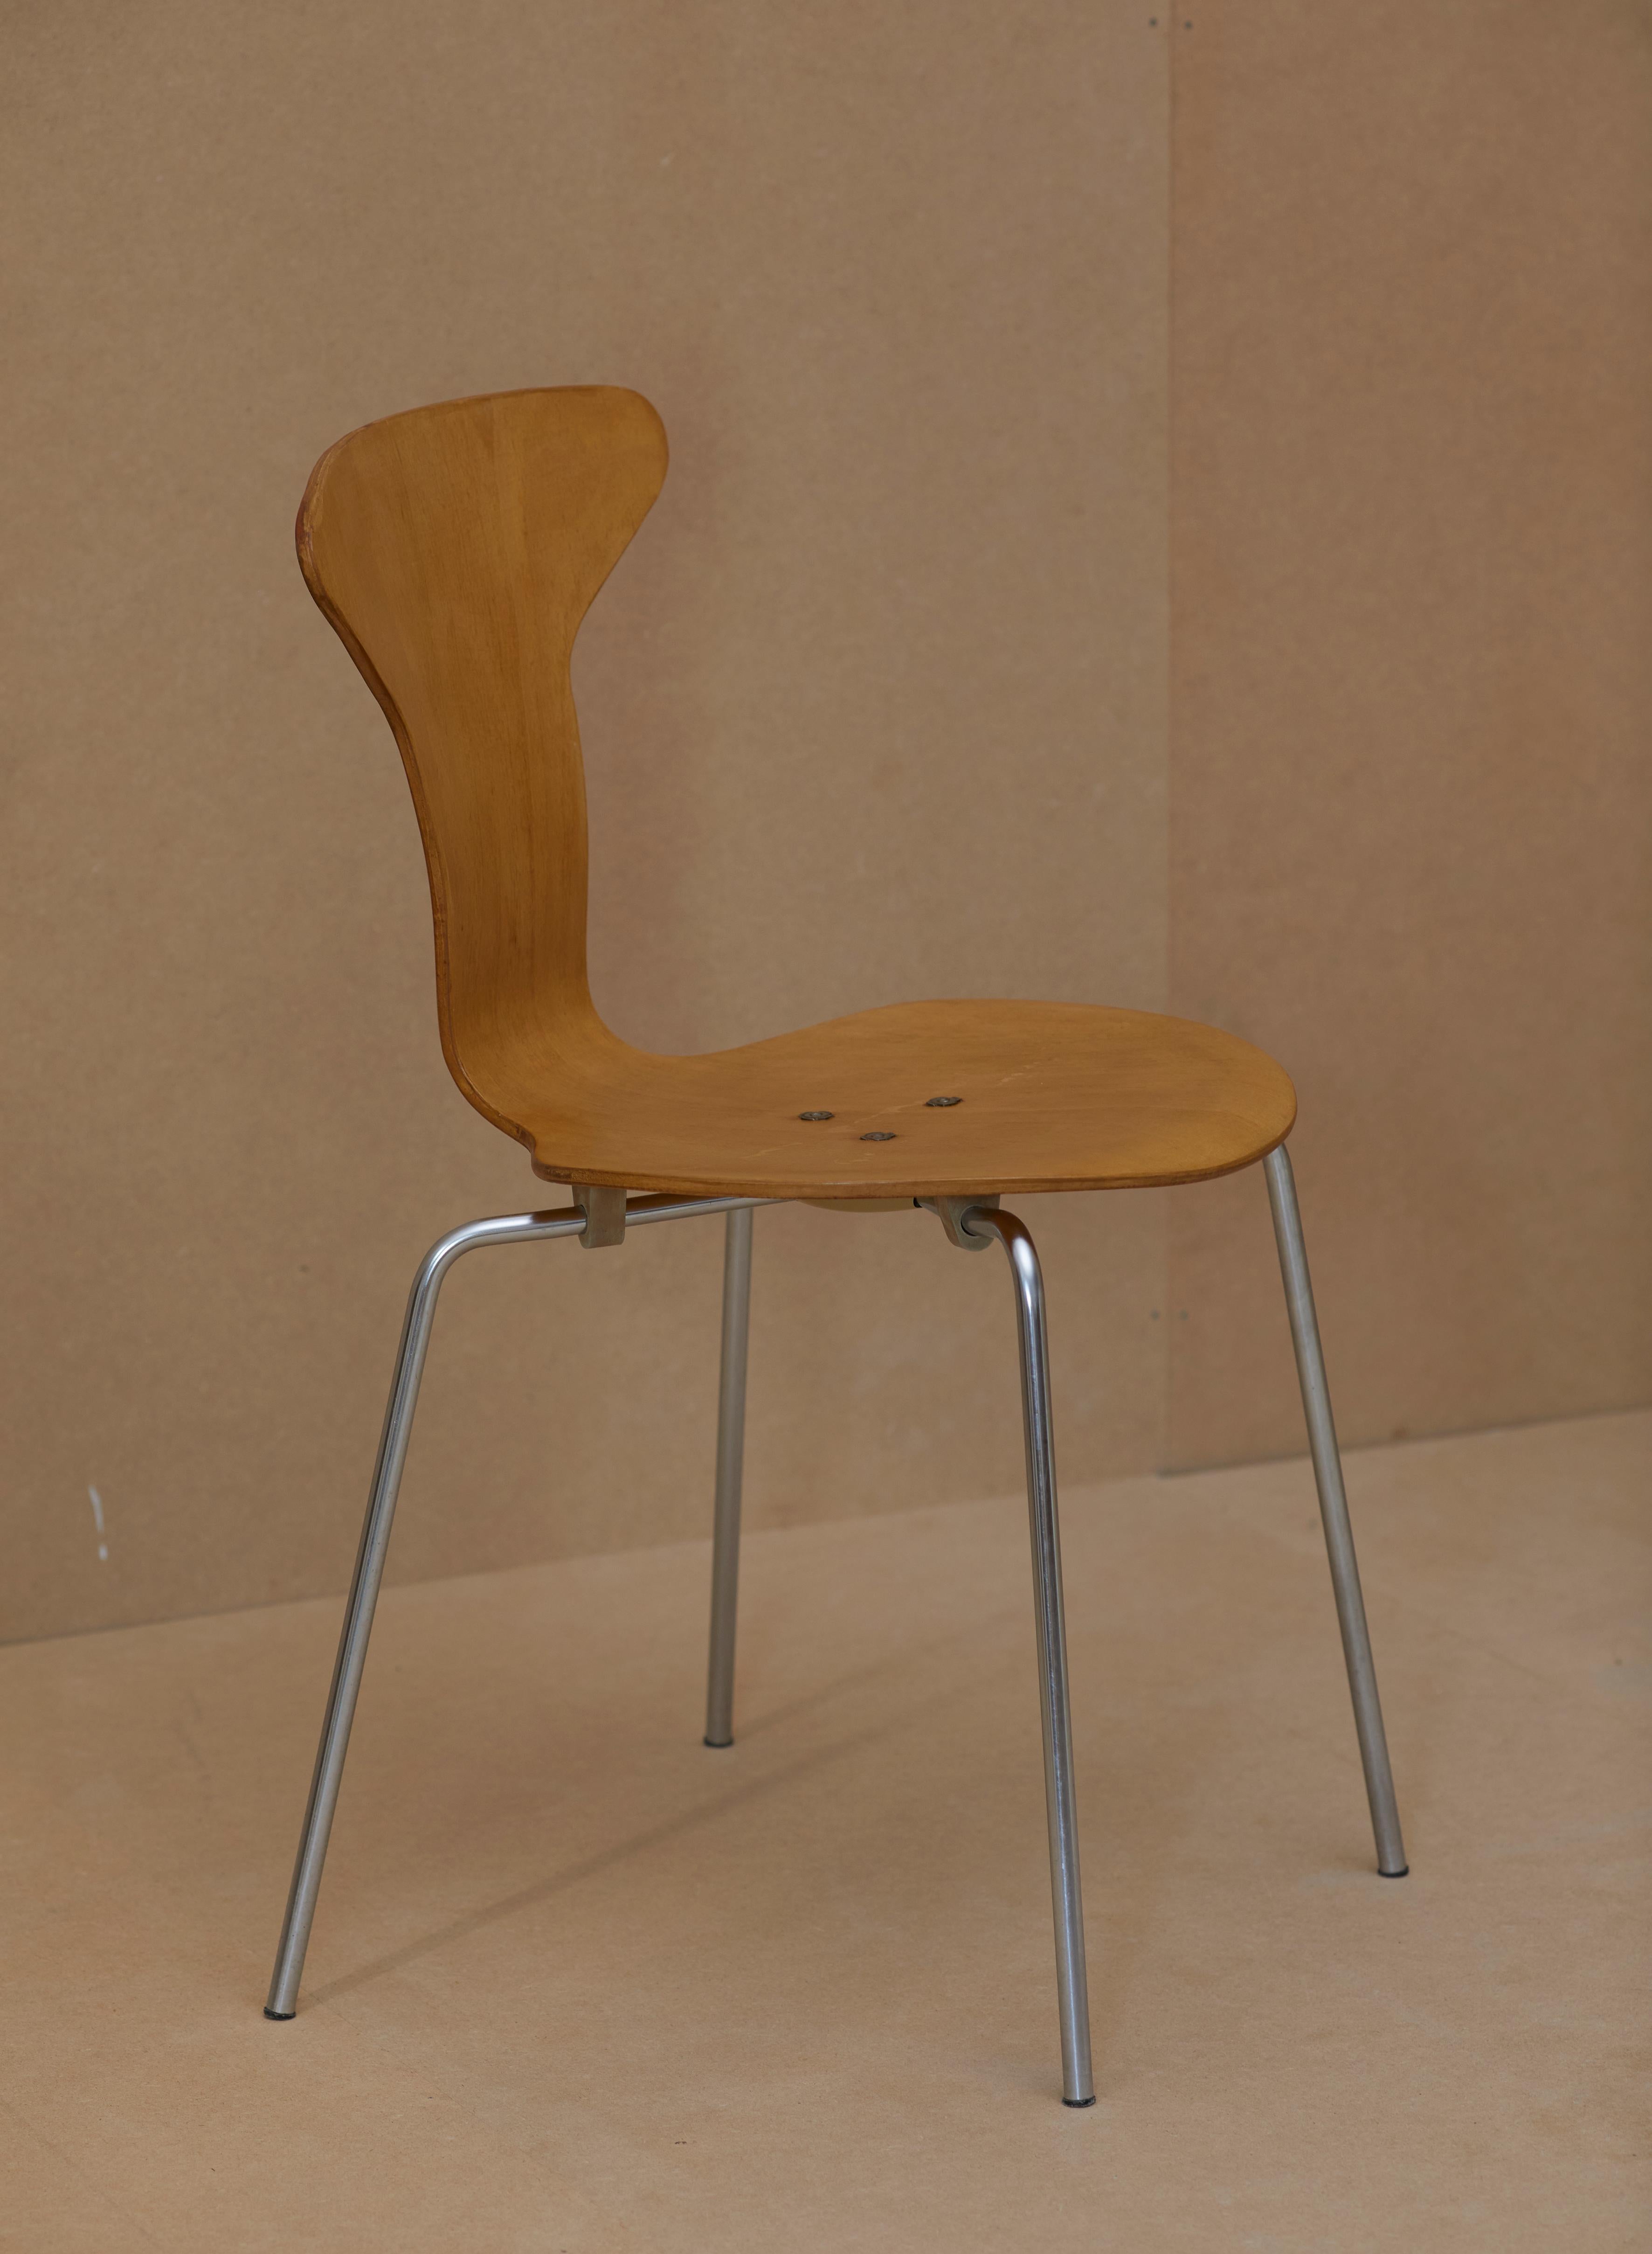 Mid-20th Century Set of two Mosquito chairs 3105 by Arne Jacobsen for Fritz Hansen circa 1969 For Sale